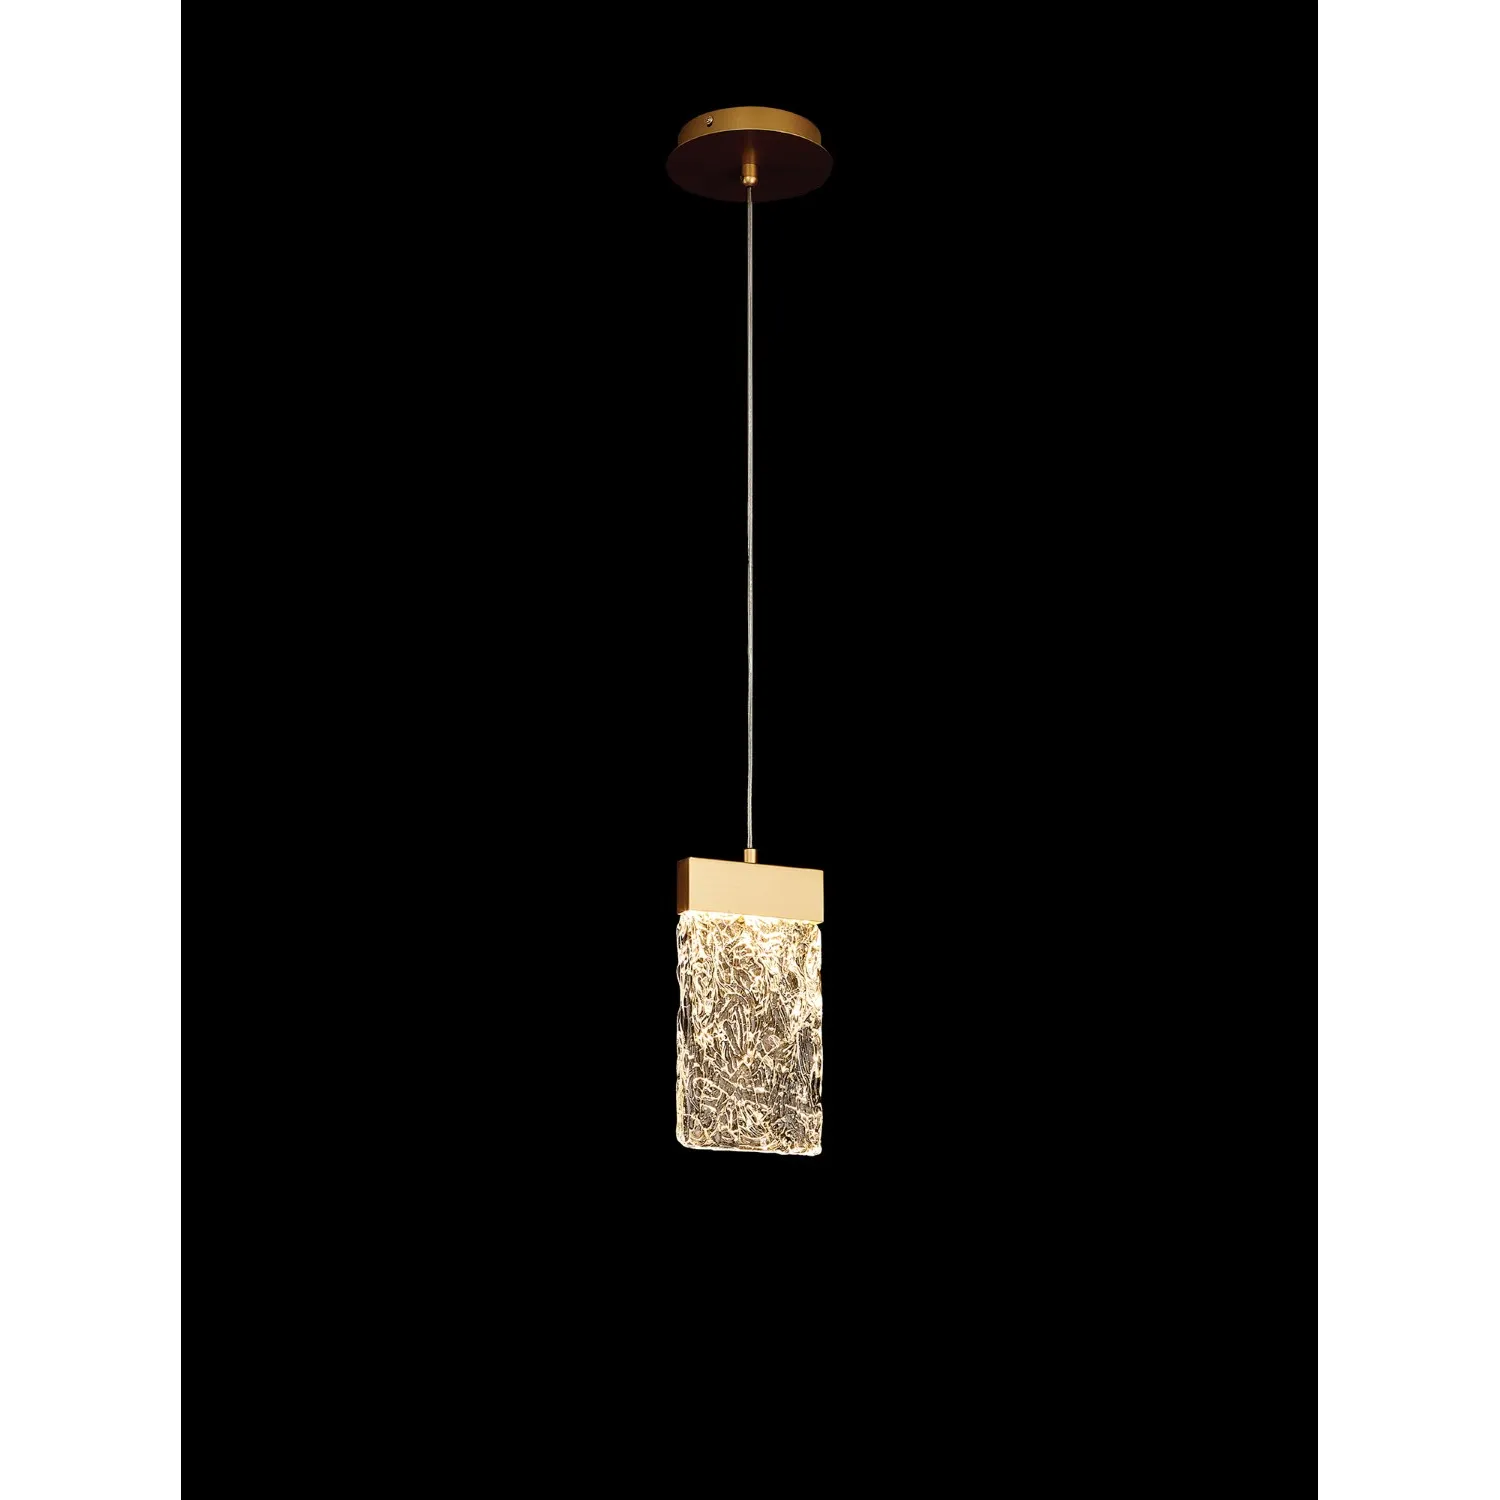 Enfield Medium Pendant 2m, 1 x 4.5W LED, 3000K, 160lm, Painted Brushed Gold, 3yrs Warranty